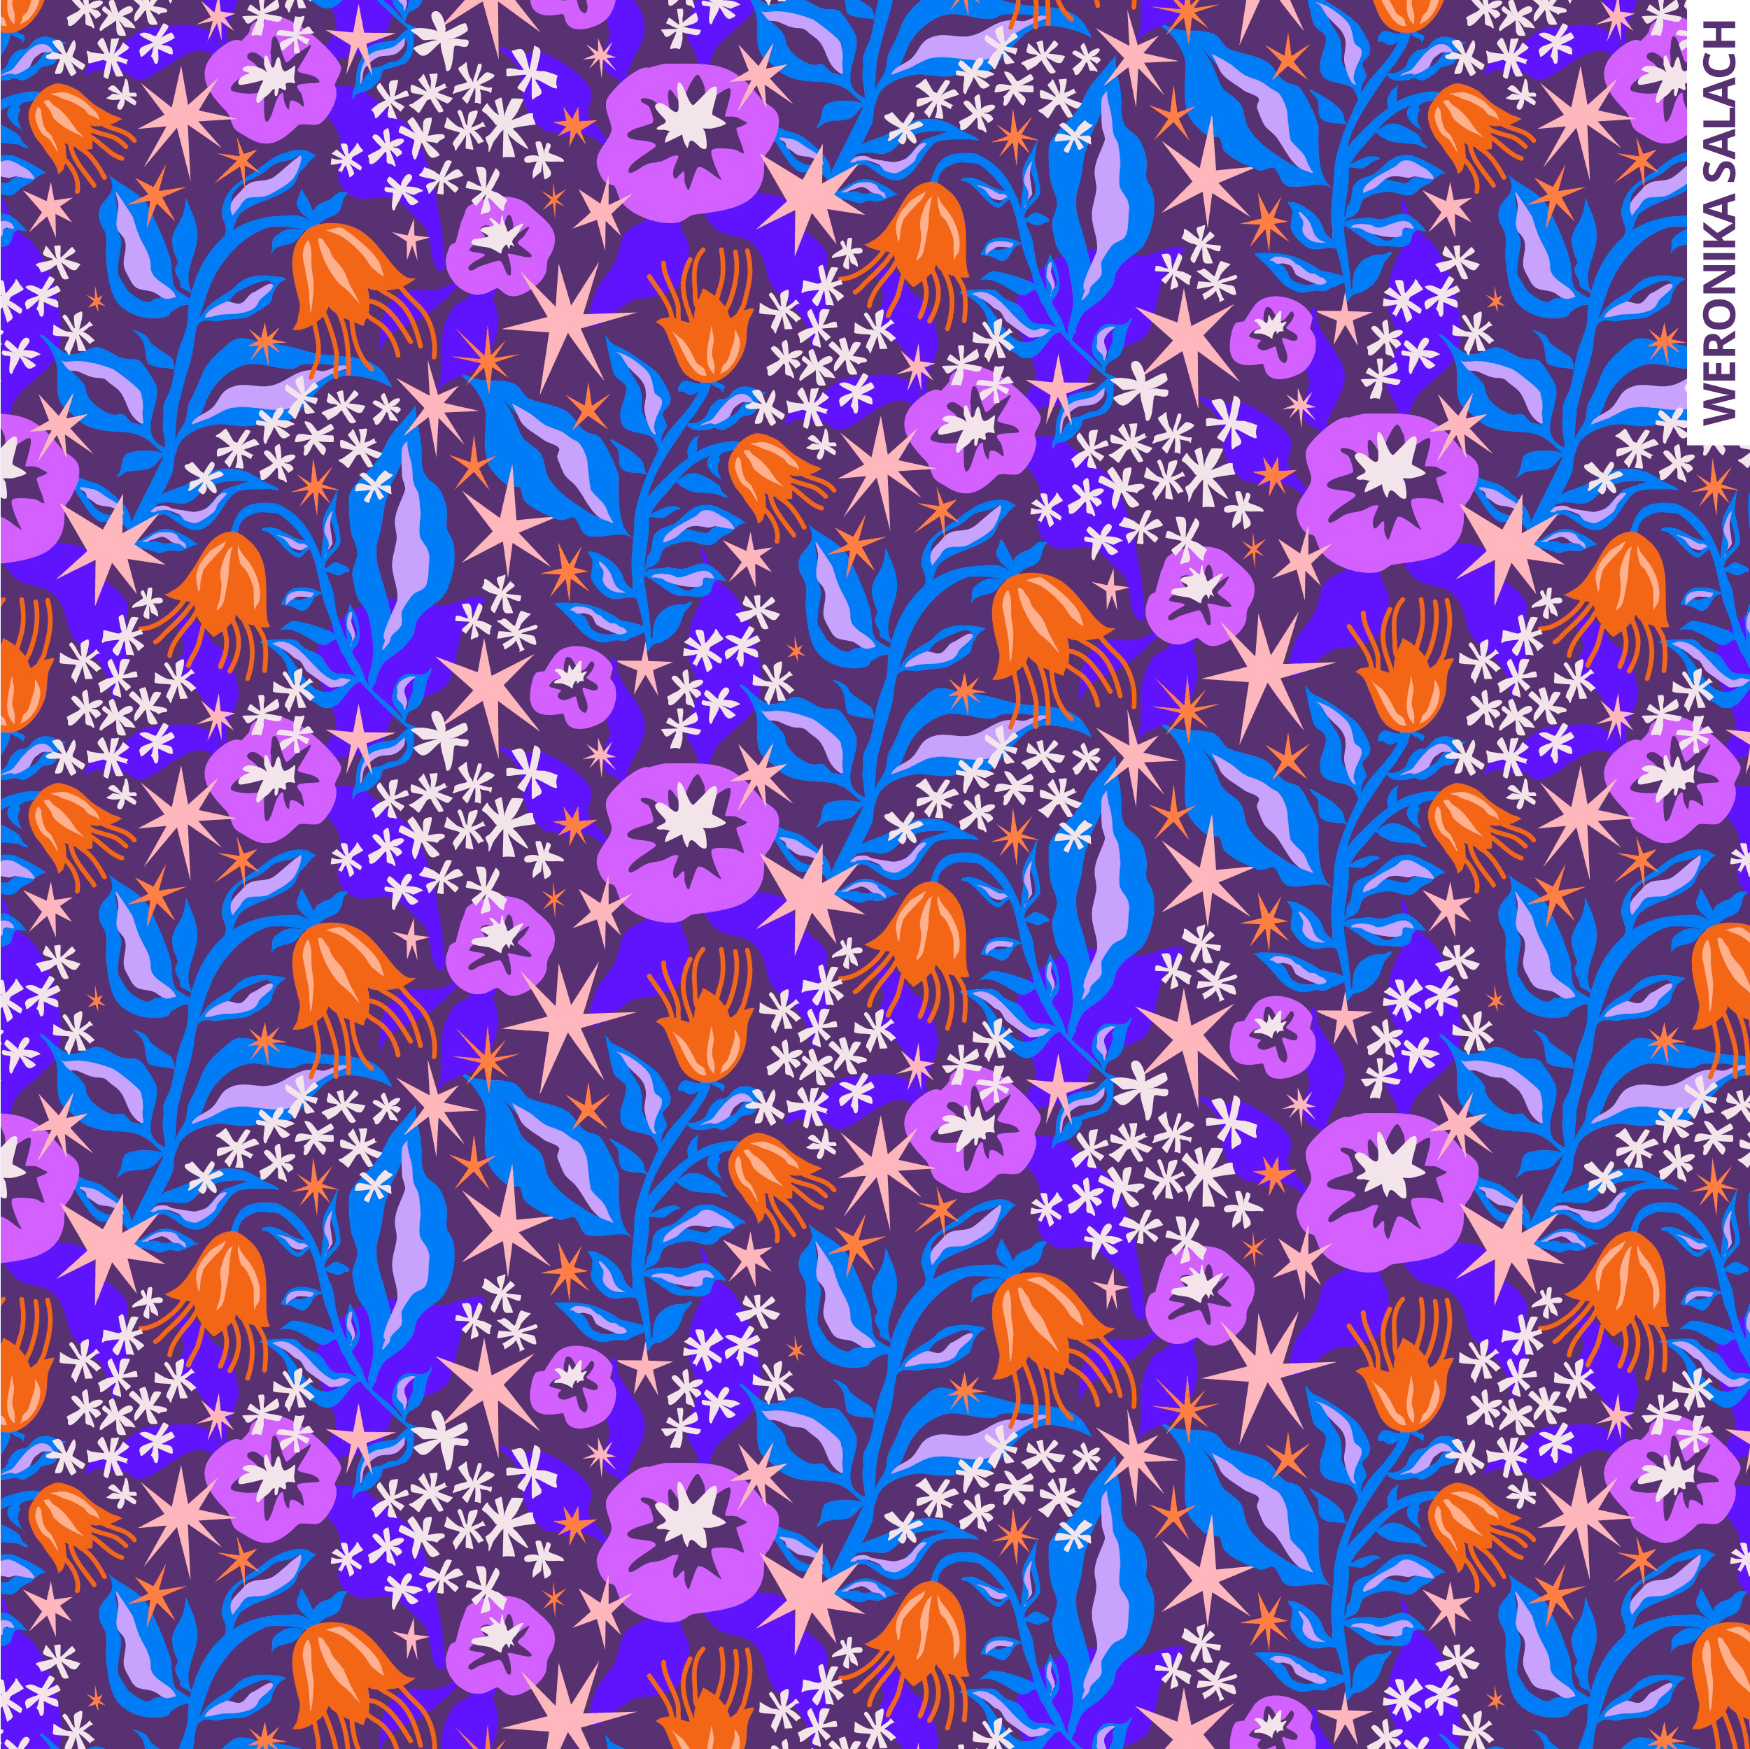 WS_repeat pattern_ditsy flowers and stars whimsical.png